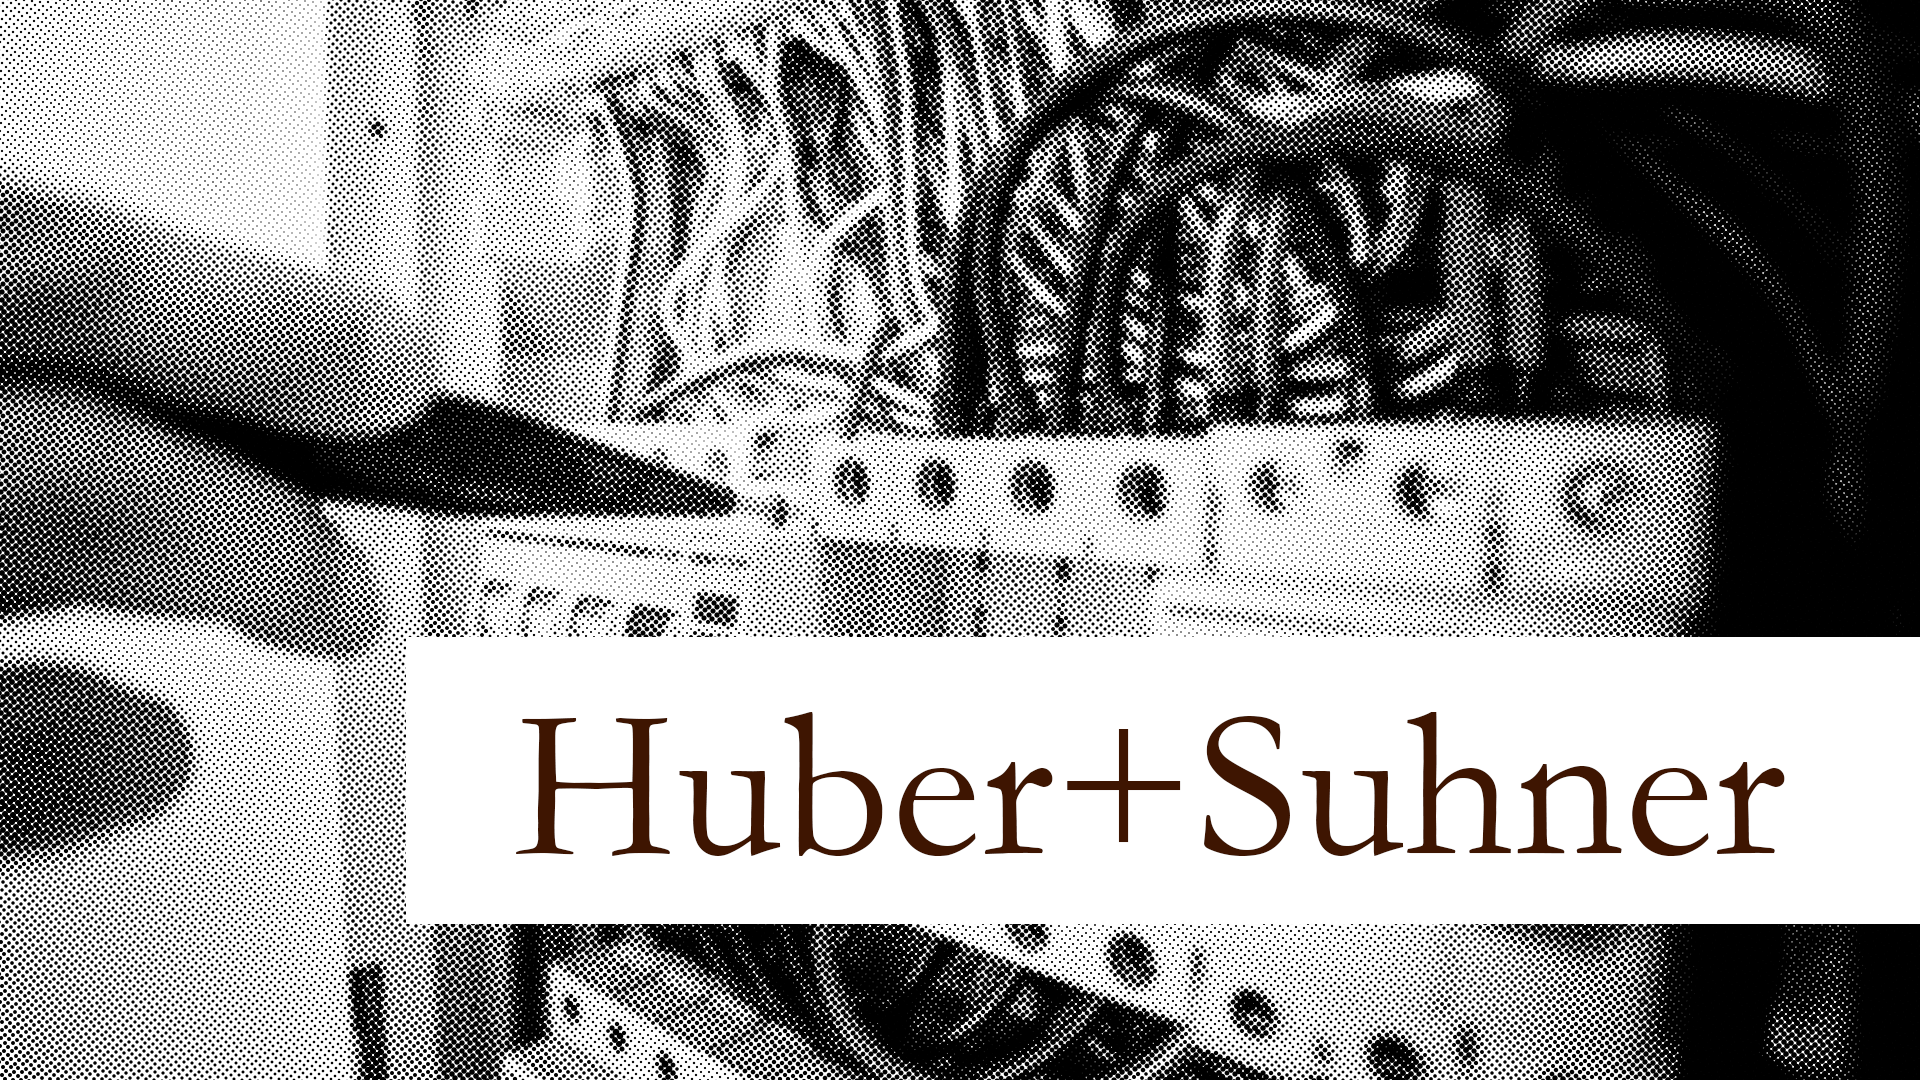 Our Wikifolio gets connected with Huber+Suhner